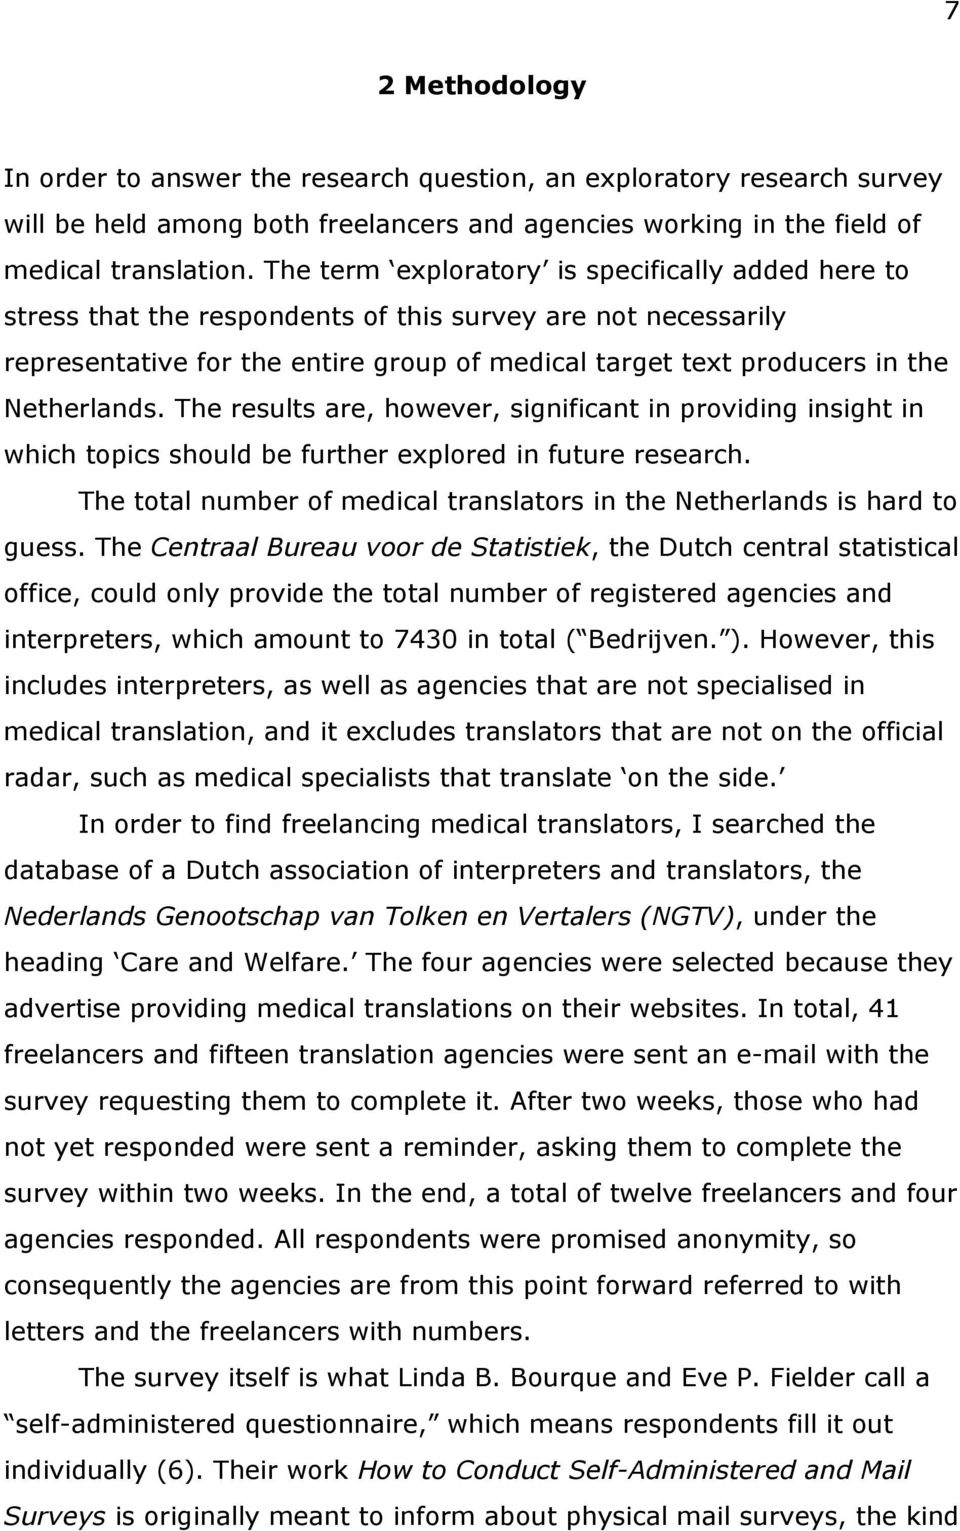 The results are, however, significant in providing insight in which topics should be further eplored in future research. The total number of medical translators in the Netherlands is hard to guess.